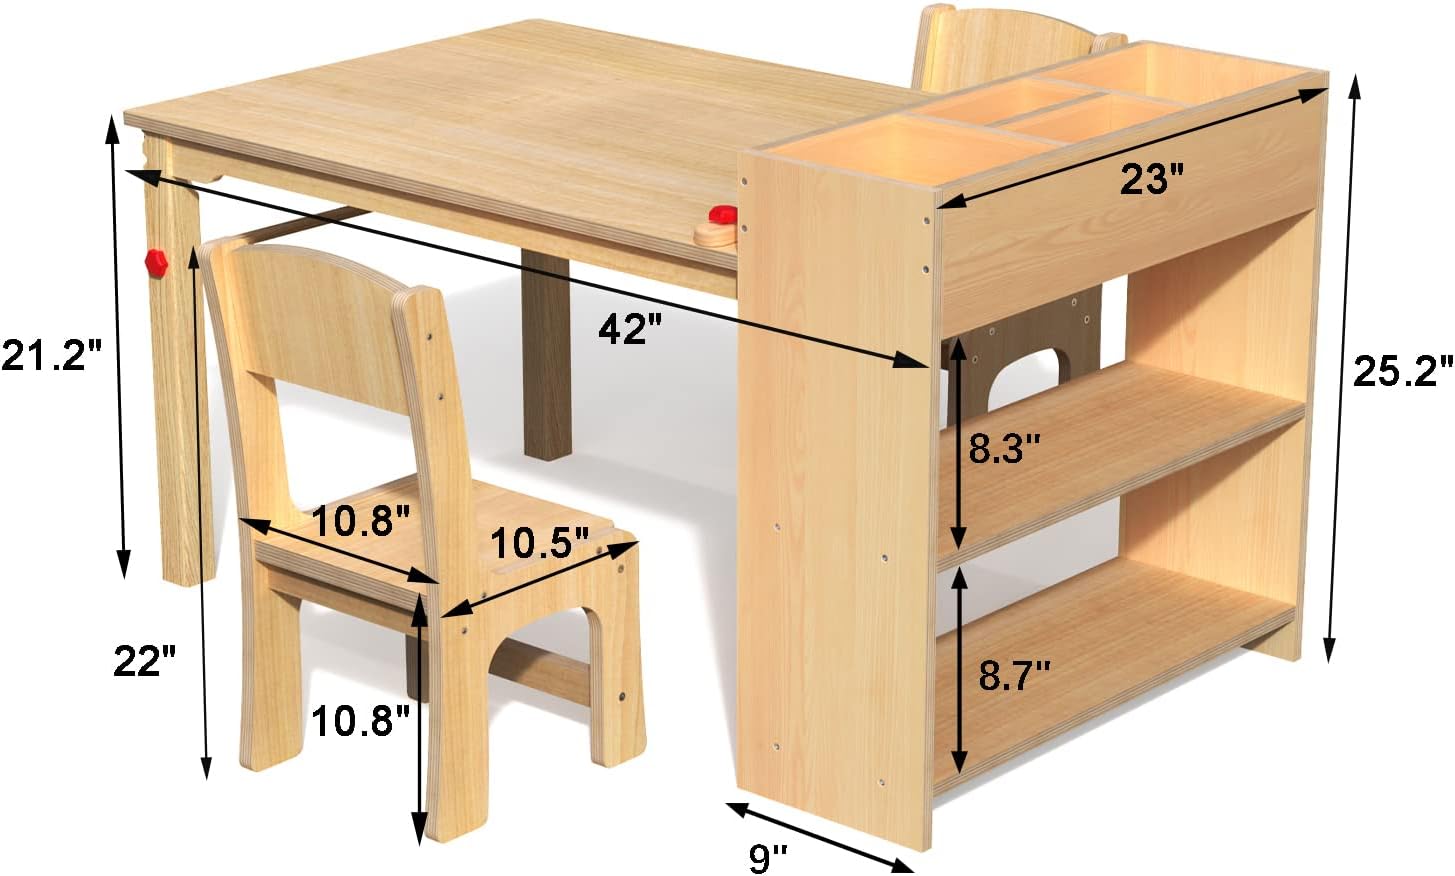 https://bigbigmart.com/wp-content/uploads/2023/09/GDLF-Kids-Art-Table-and-2-Chairs-Wooden-Drawing-Desk-Activity-Crafts-Childrens-Furniture-42x23...jpg